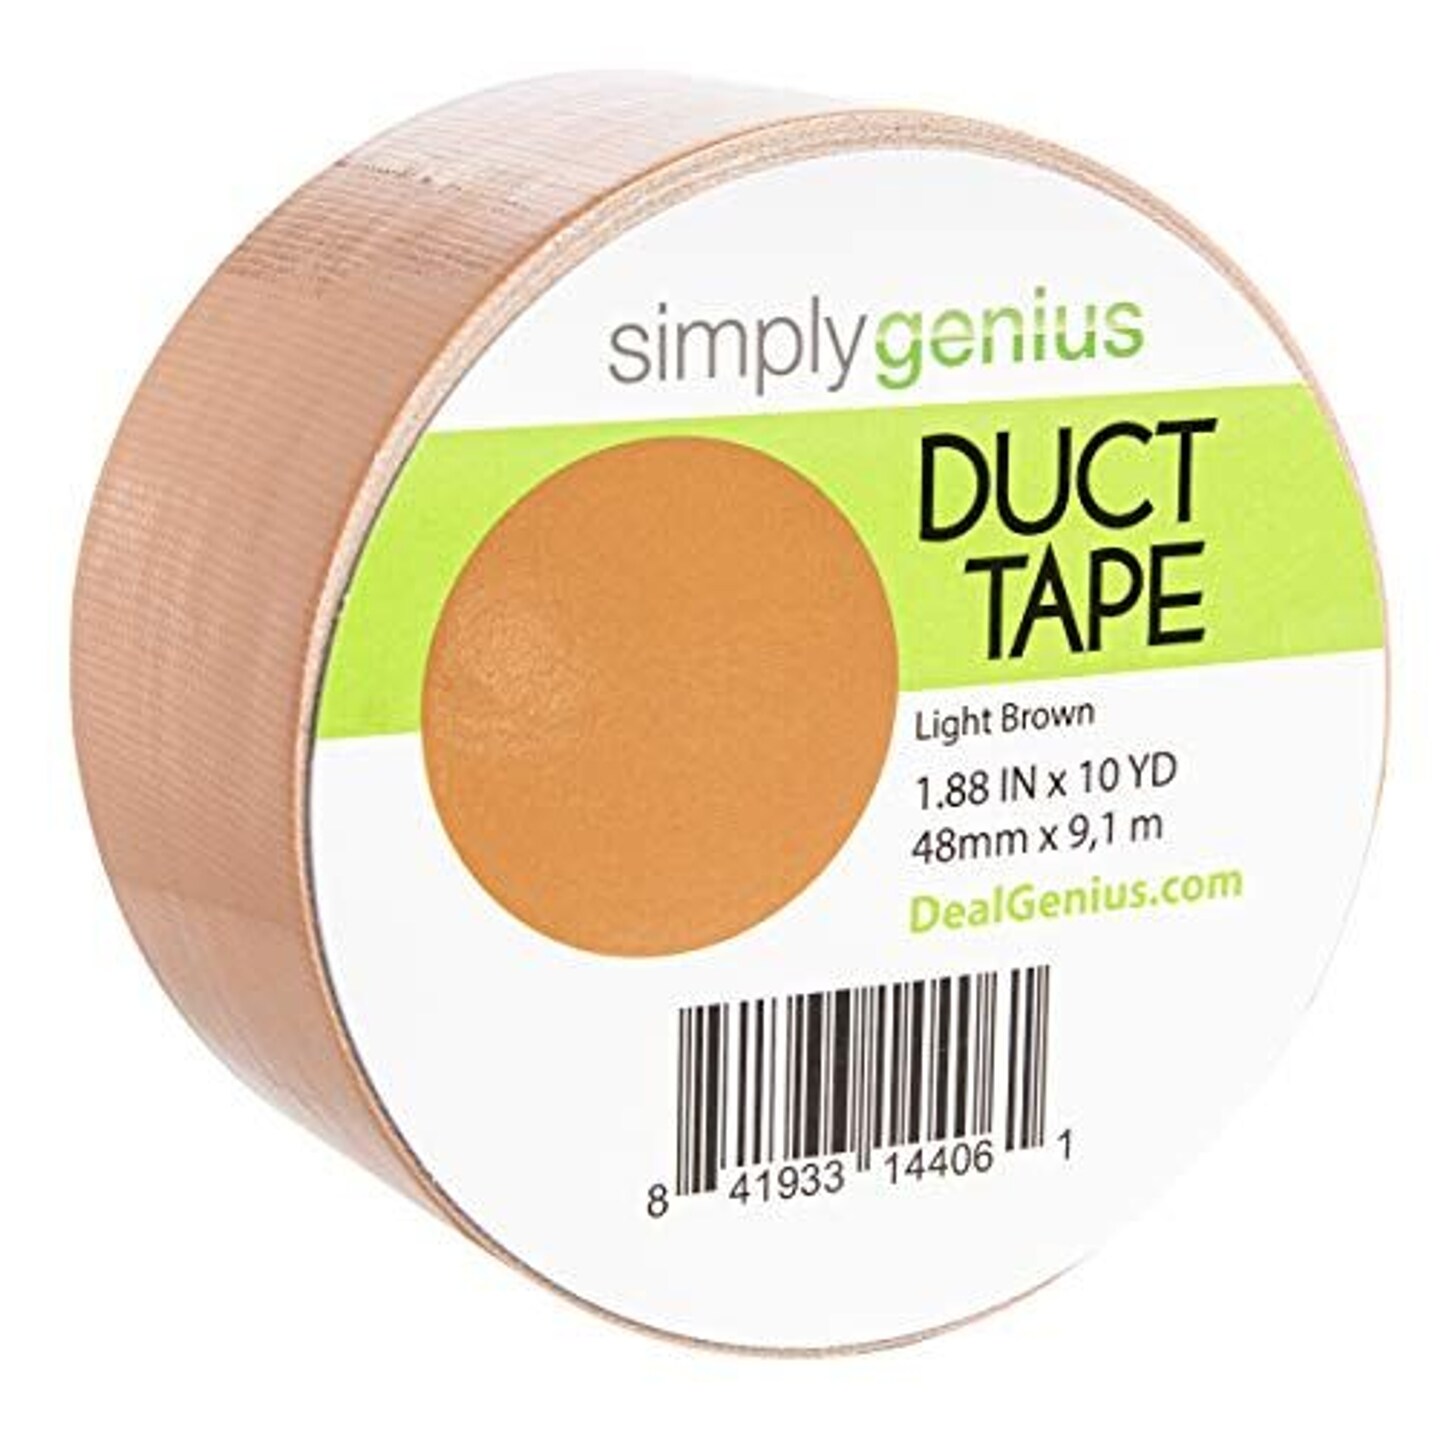 Simply Genius Art &#x26; Craft Duct Tape Heavy Duty - Craft Supplies for Kids &#x26; Adults - Colored Duct Tape - 1.8 in x 10 yards - Colorful Tape for DIY, Craft &#x26; Home Improvement (Light Brown, Single roll)